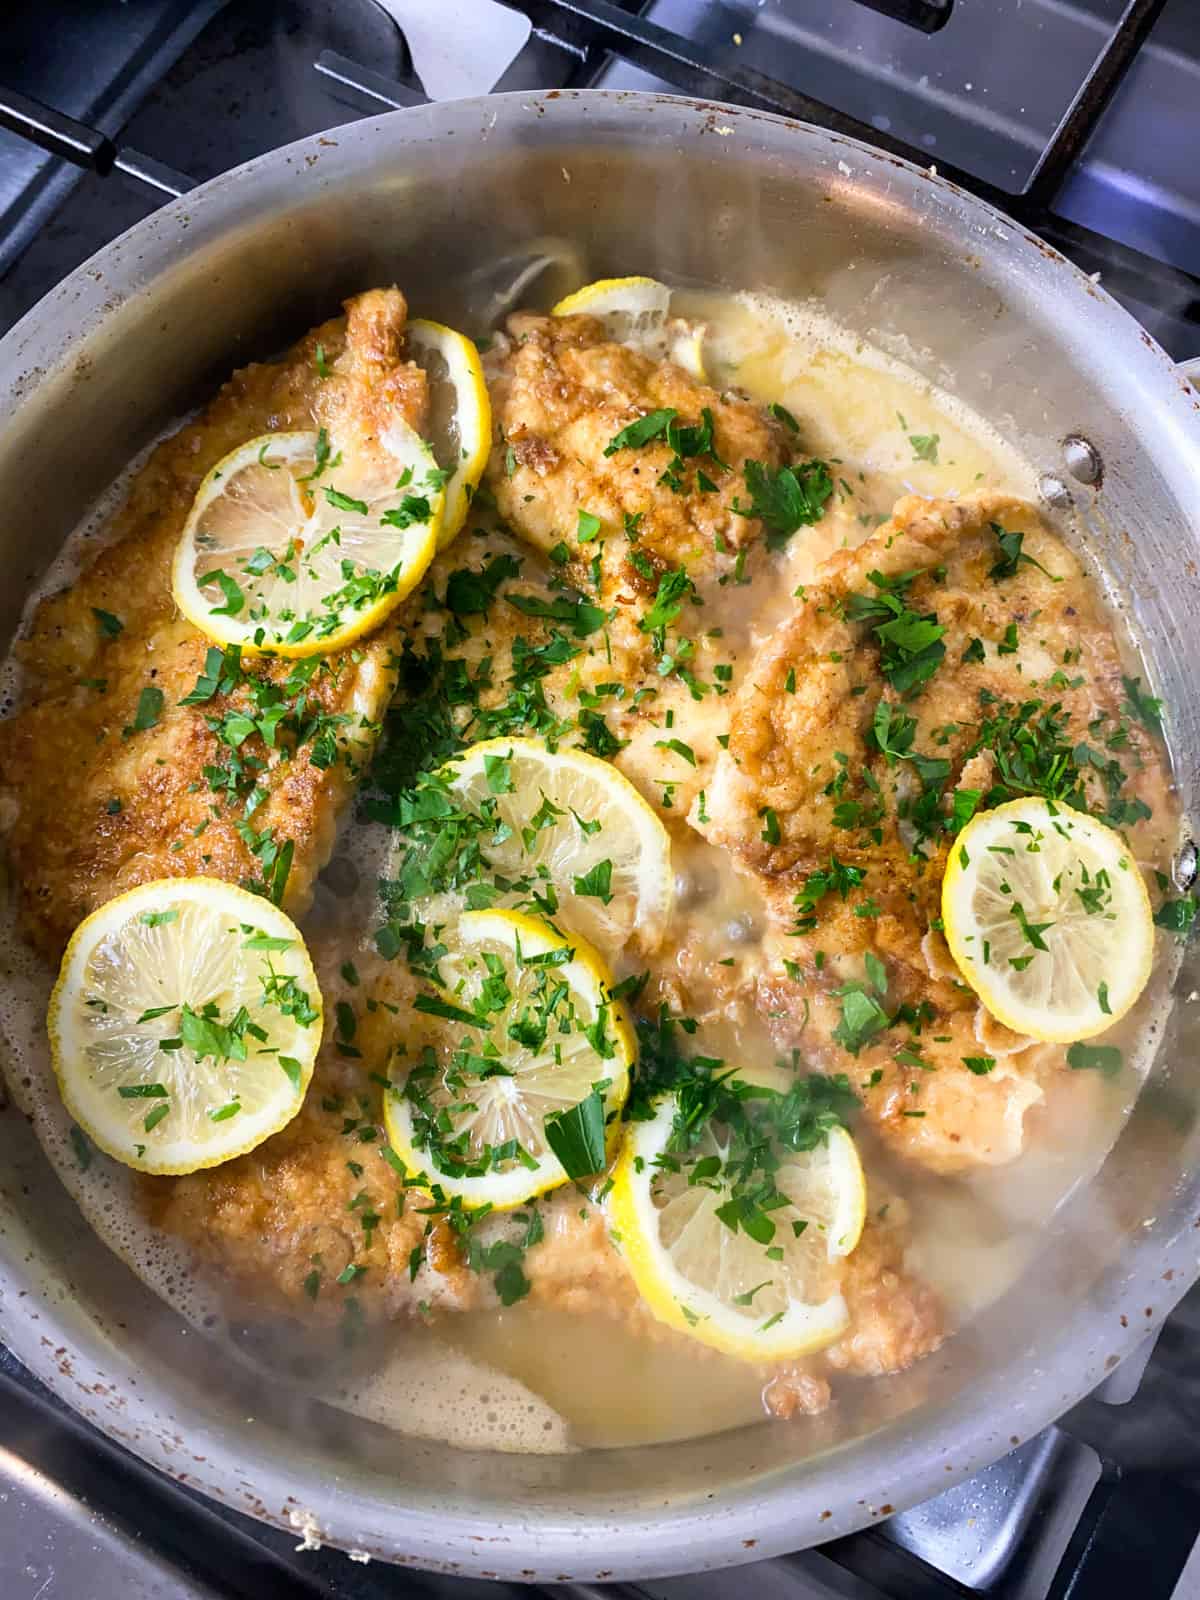 Add lemon slices and chopped parsley to the chicken francese.